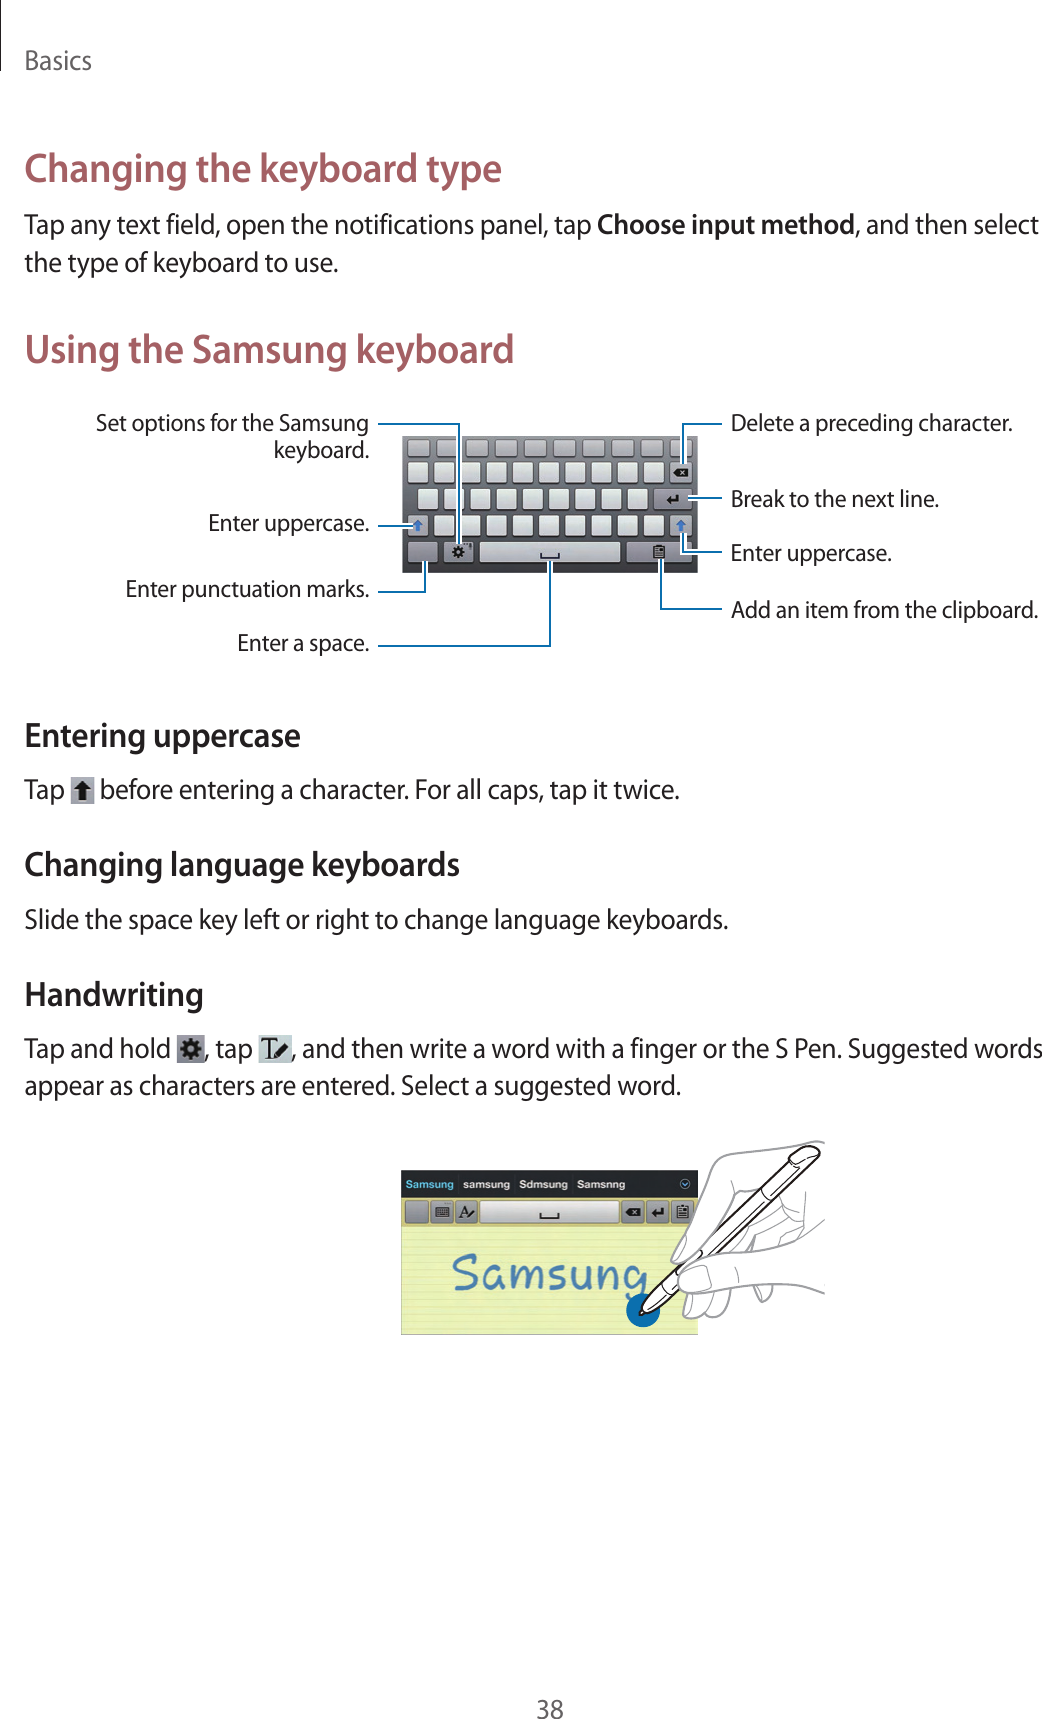 Basics38Changing the keyboard typeTap any text field, open the notifications panel, tap Choose input method, and then select the type of keyboard to use.Using the Samsung keyboardBreak to the next line.Delete a preceding character.Enter punctuation marks.Enter uppercase.Set options for the Samsung keyboard.Enter a space.Enter uppercase.Add an item from the clipboard.Entering uppercaseTap   before entering a character. For all caps, tap it twice.Changing language keyboardsSlide the space key left or right to change language keyboards.HandwritingTap and hold  , tap  , and then write a word with a finger or the S Pen. Suggested words appear as characters are entered. Select a suggested word.